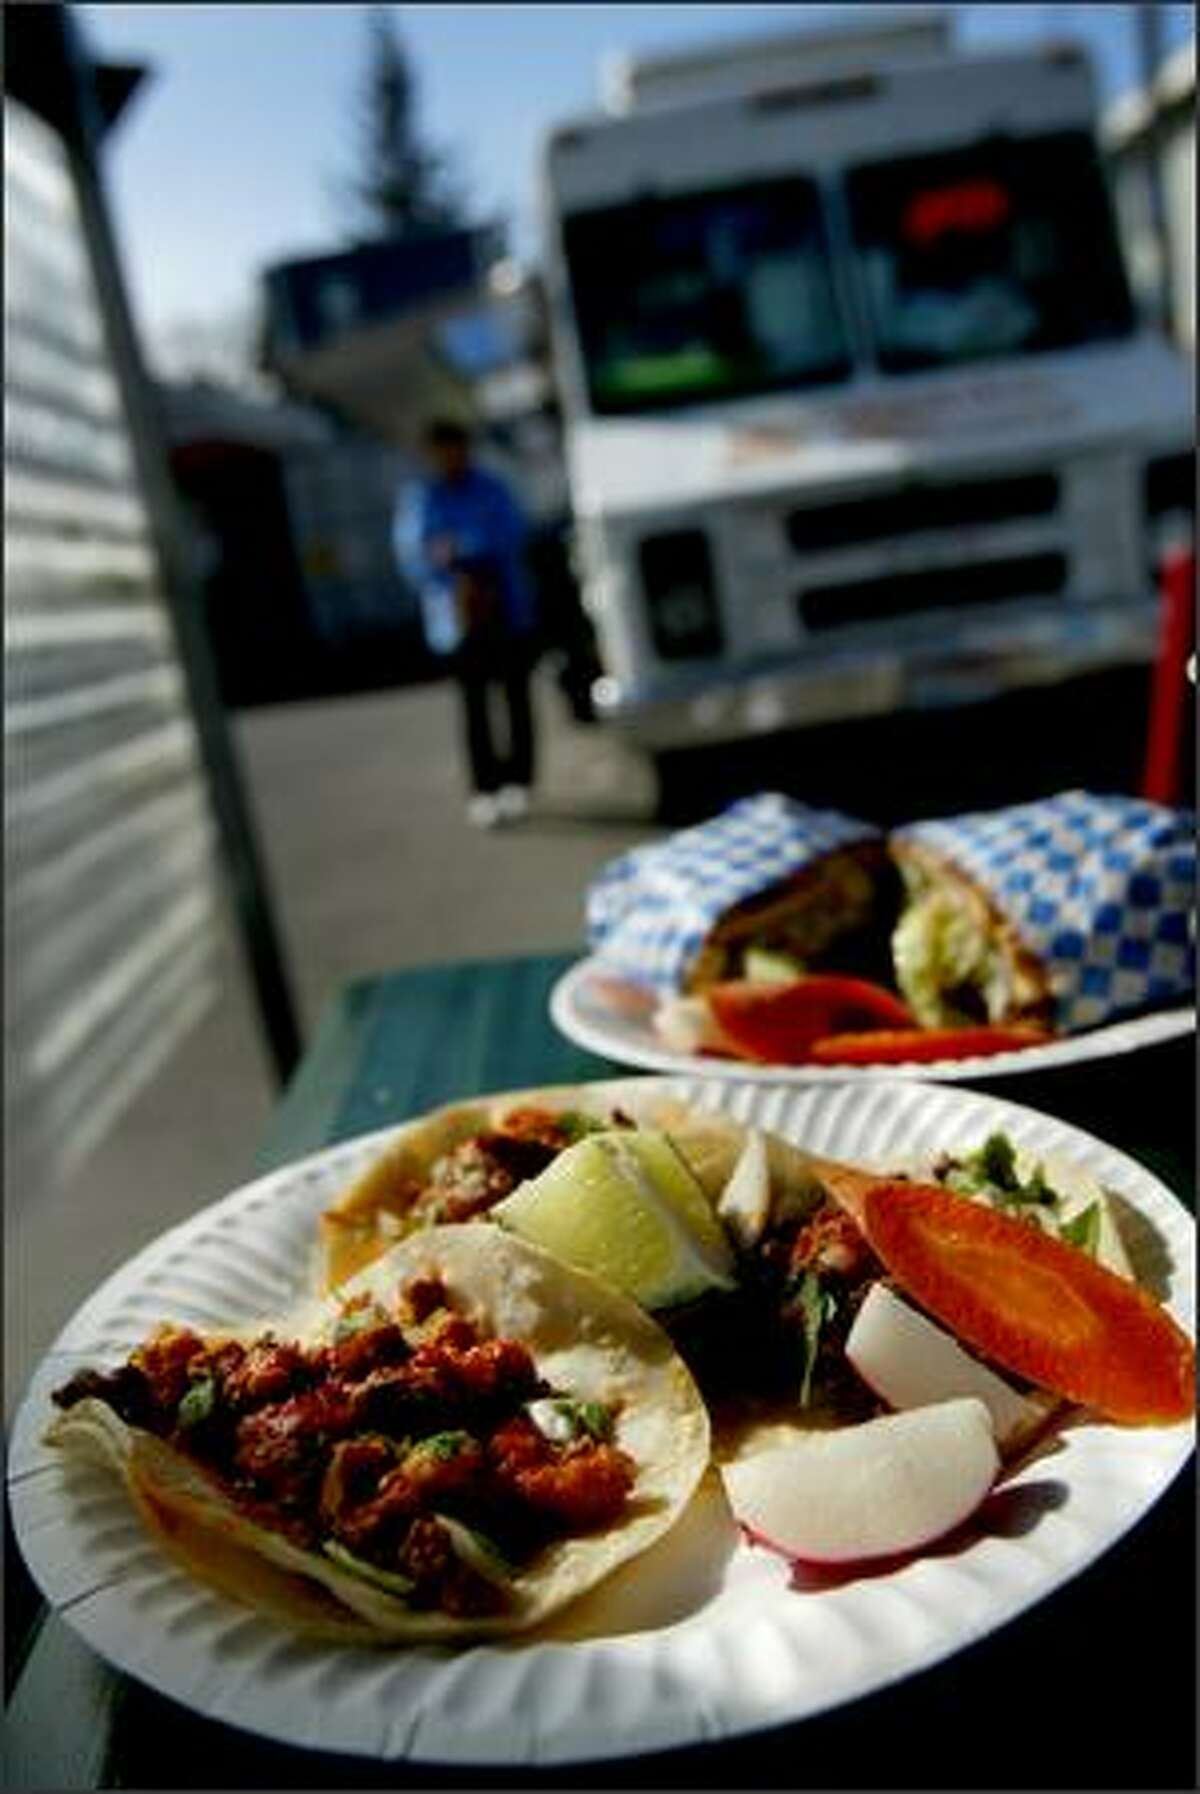 Birria (spicy Mexican meat stew) and tripe tacos, in the foreground, and a chicken torta plate from the Taqueria El Rincon taco truck in South Park.